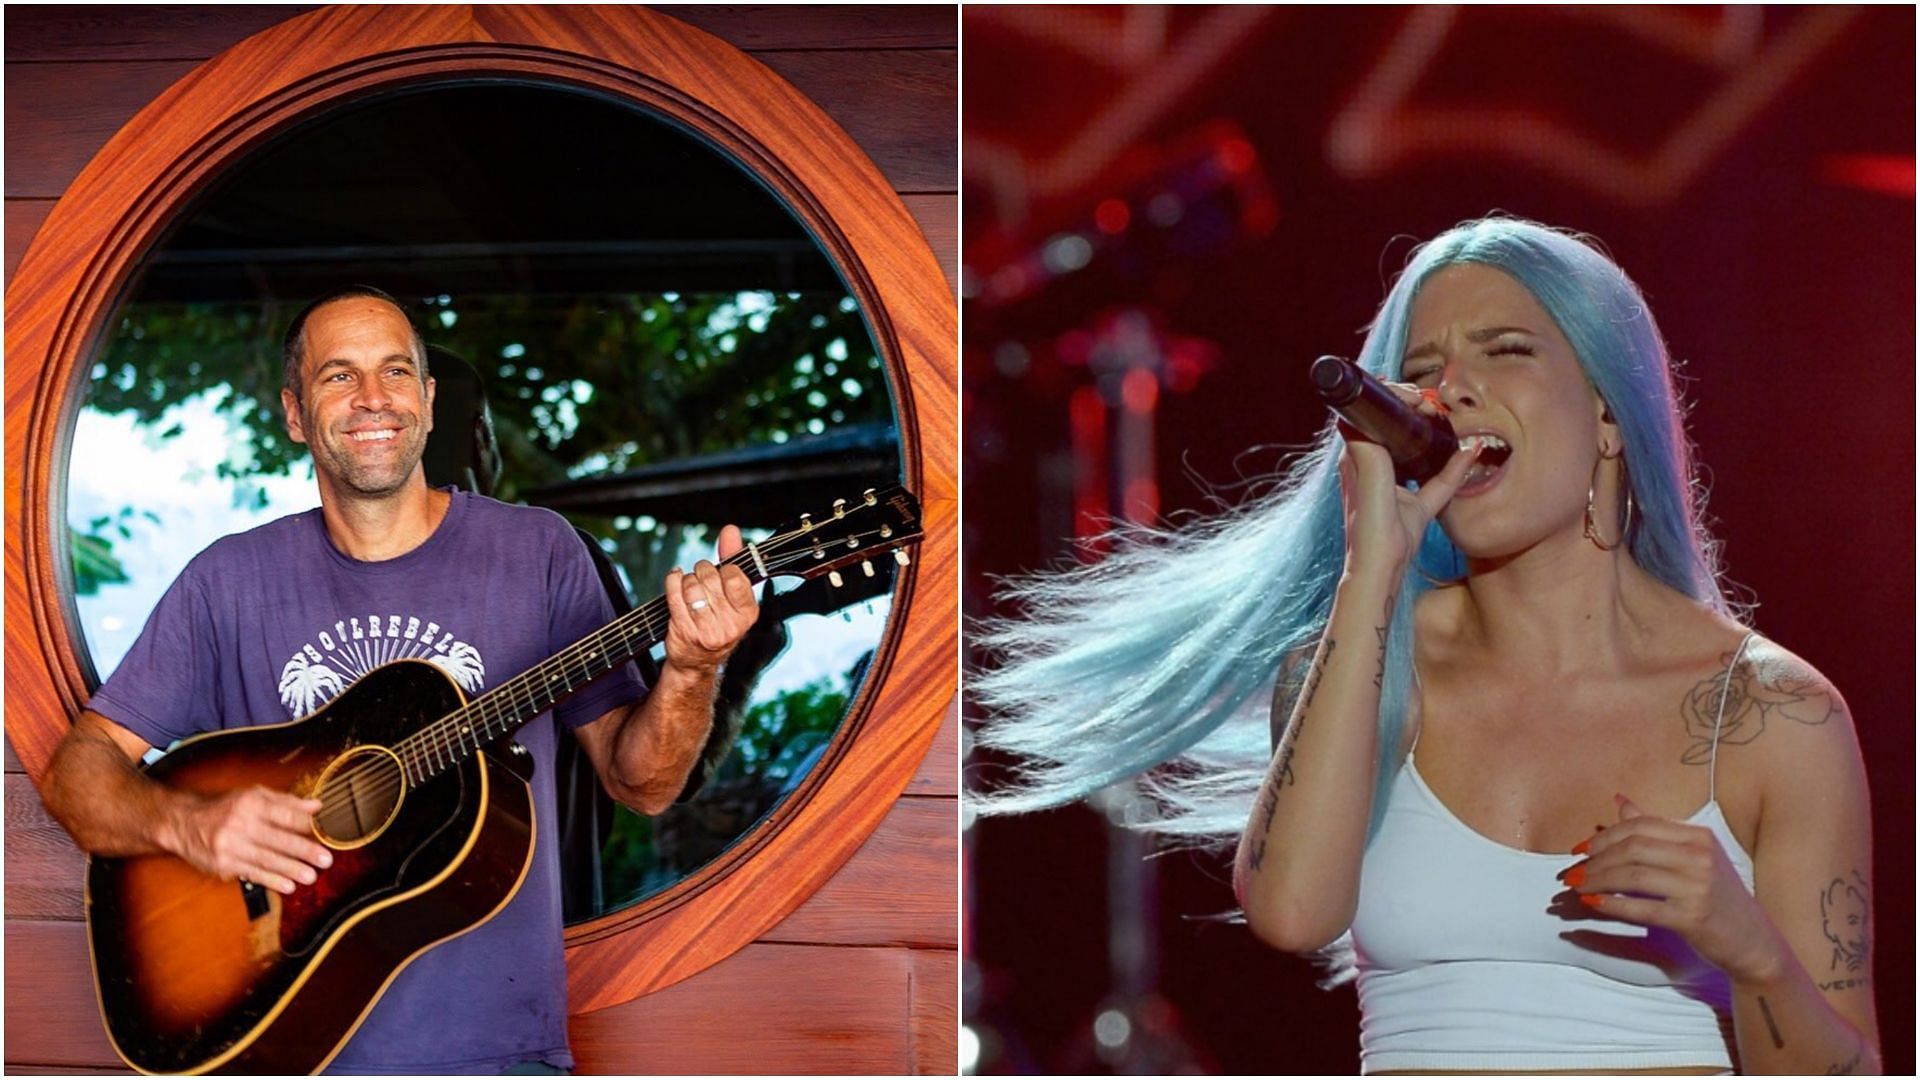 Jack Johnson and Halsey are among the headliners at the Festival D&#039;ete de Quebec. (Images via Instagram and Getty)